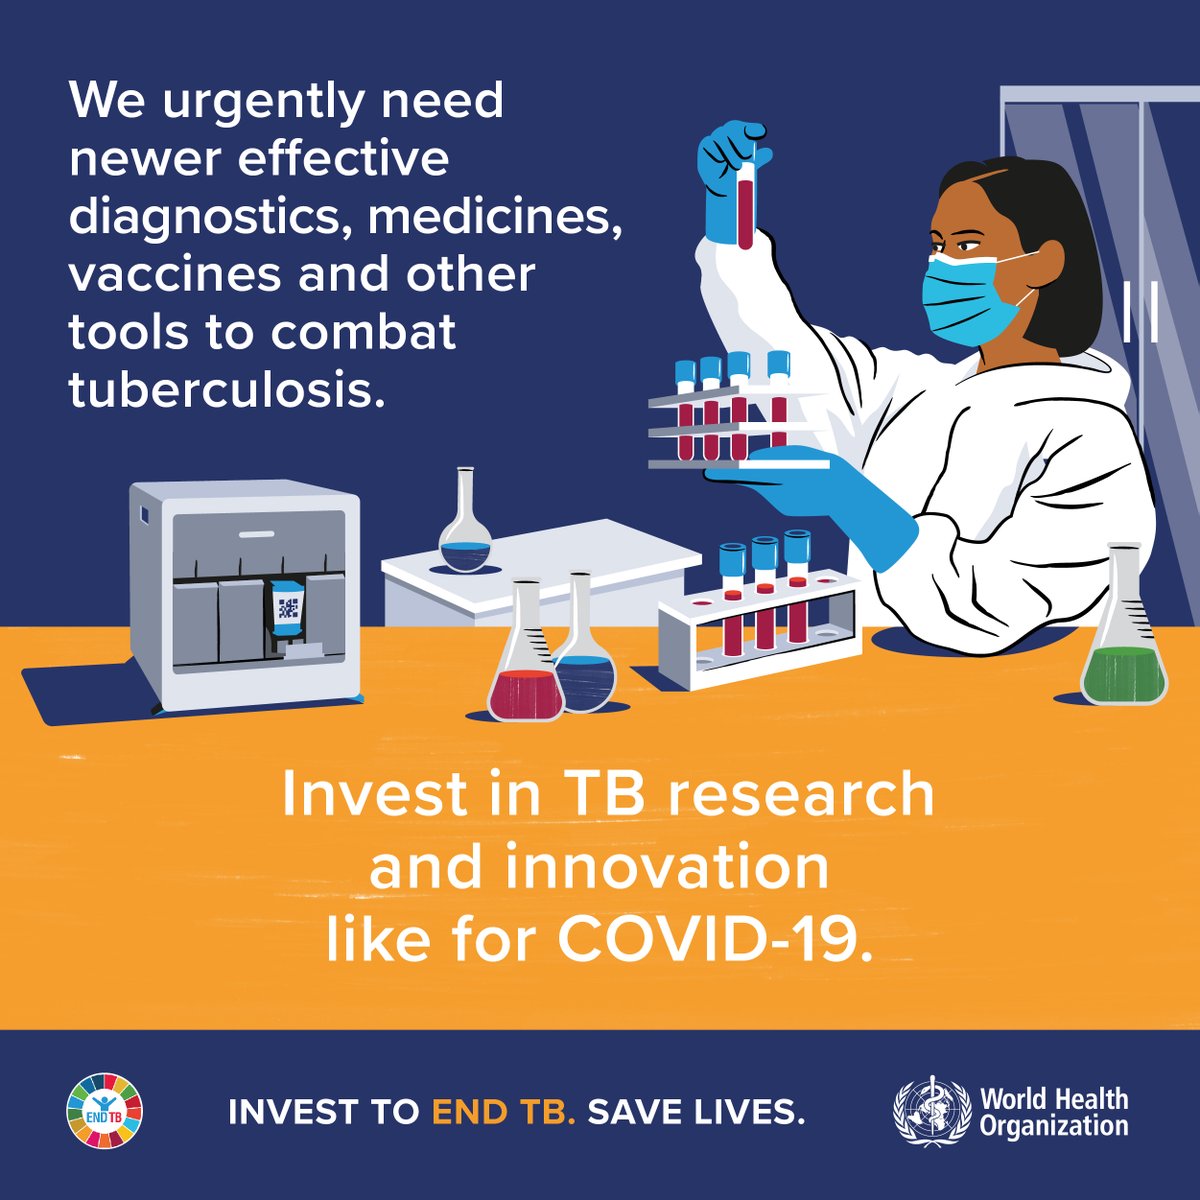 This is what we need to #EndTB: 🫁Restore access to essential TB services ↗️Increase investments in #tuberculosis ✅Address broader socioeconomic determinants influencing TB epidemic 👩🏽‍🔬Advance TB research & innovation 🆕Diagnostics 🆕Drugs 🆕Vaccines 📌 bit.ly/3Fn2AL